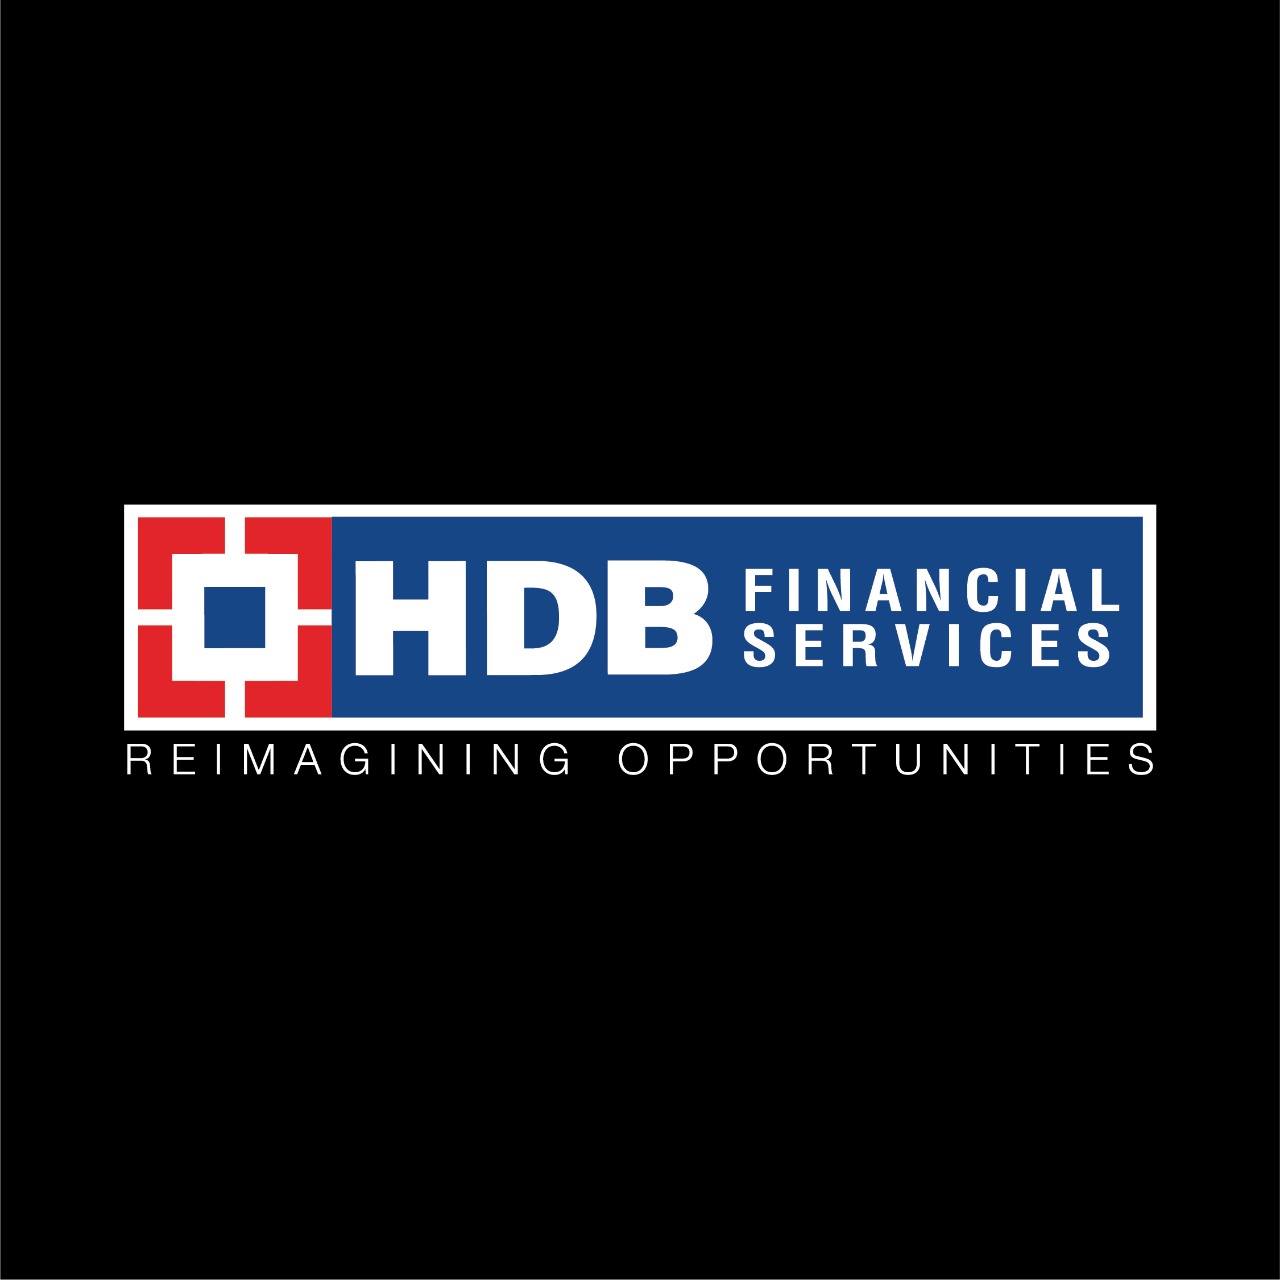 HDB FINANCIAL SERVICES LTD|Accounting Services|Professional Services